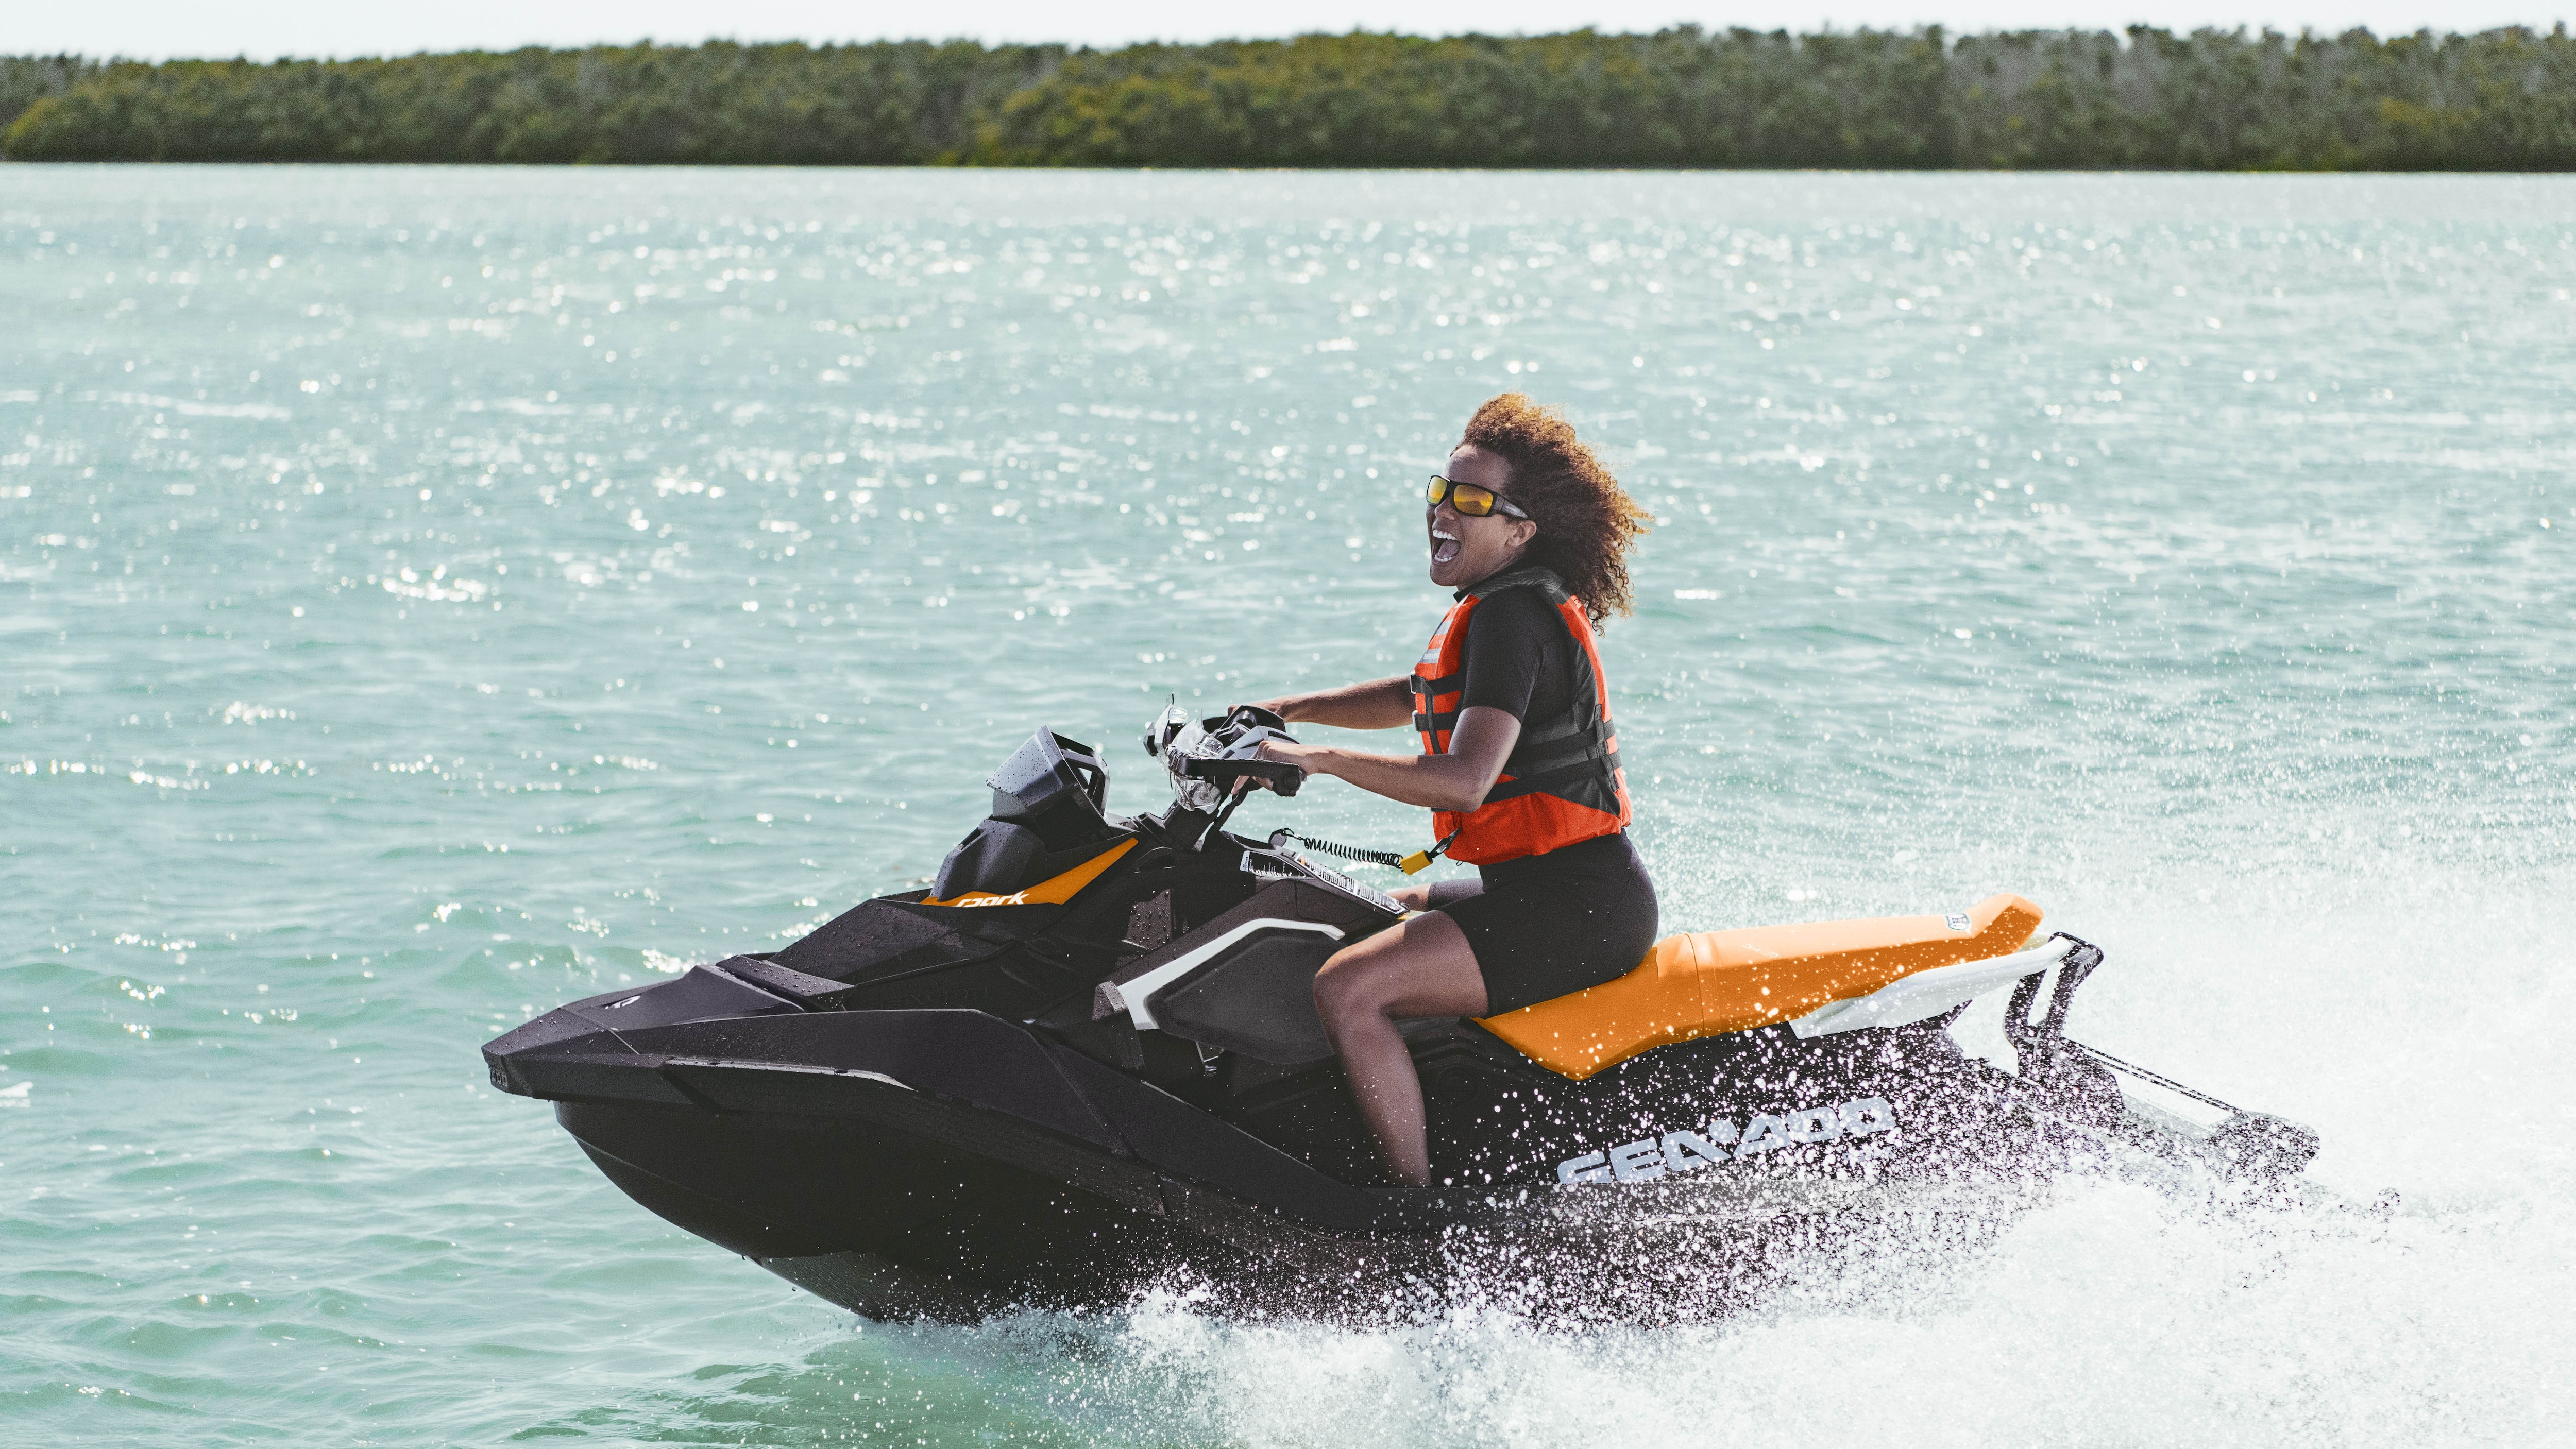 Sea-Doo SPARK: small and affordable Personal Watercraft - Sea-Doo